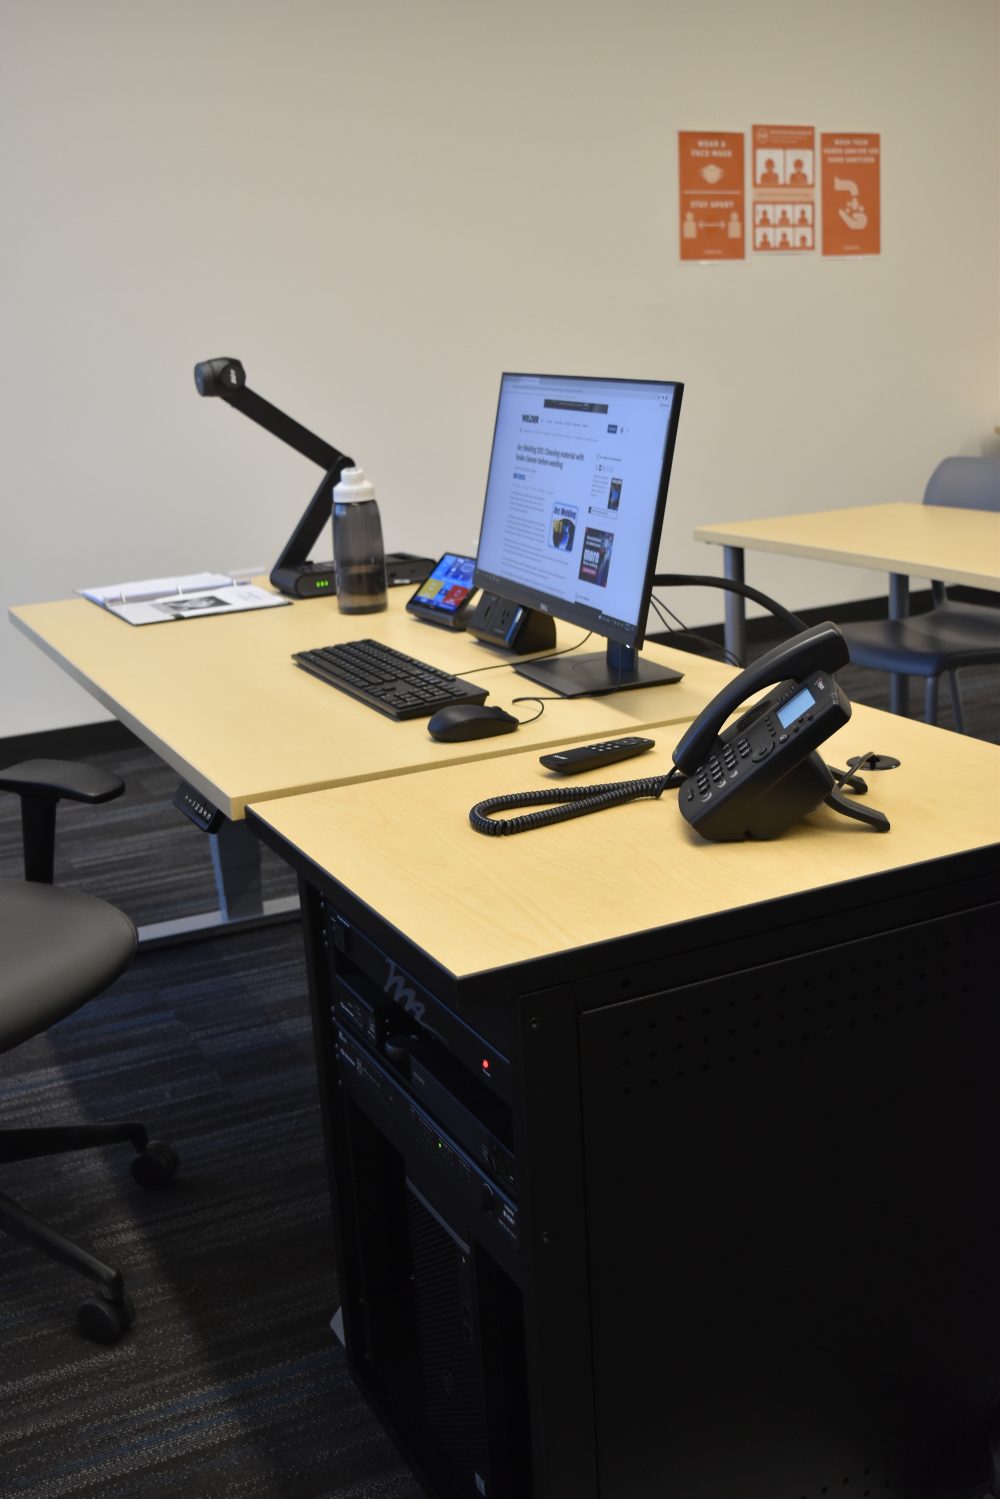 Presenter's table in the classroom, housing the touch screen control, monitor, keyboard, mouse, phone and document projector